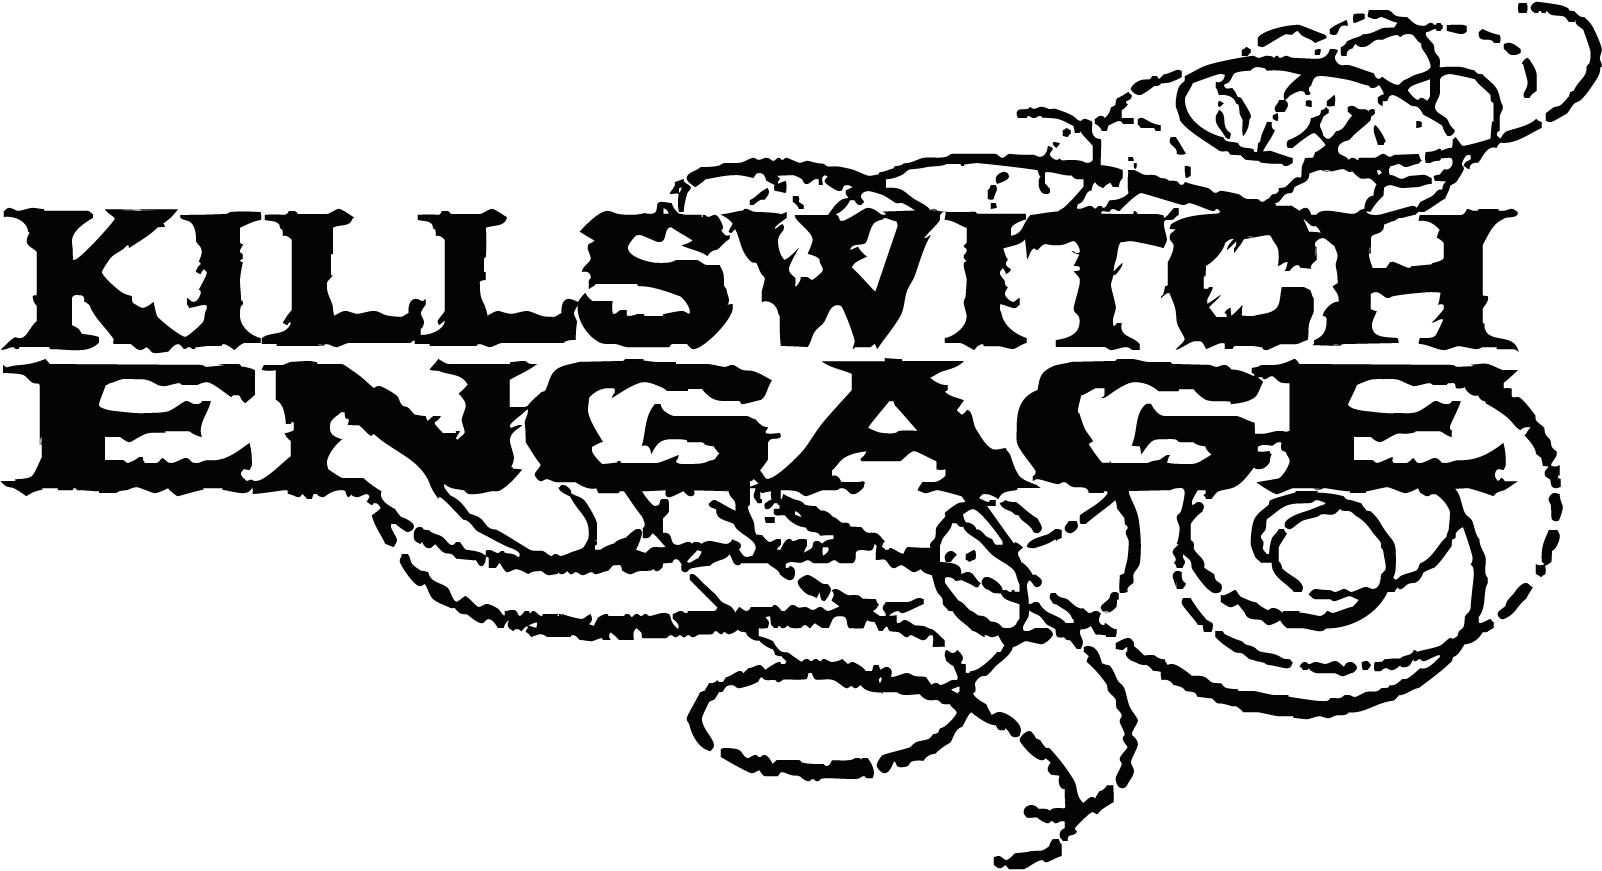 Image Killswitch Engage Logo Pc Android iPhone And iPad Wallpaper